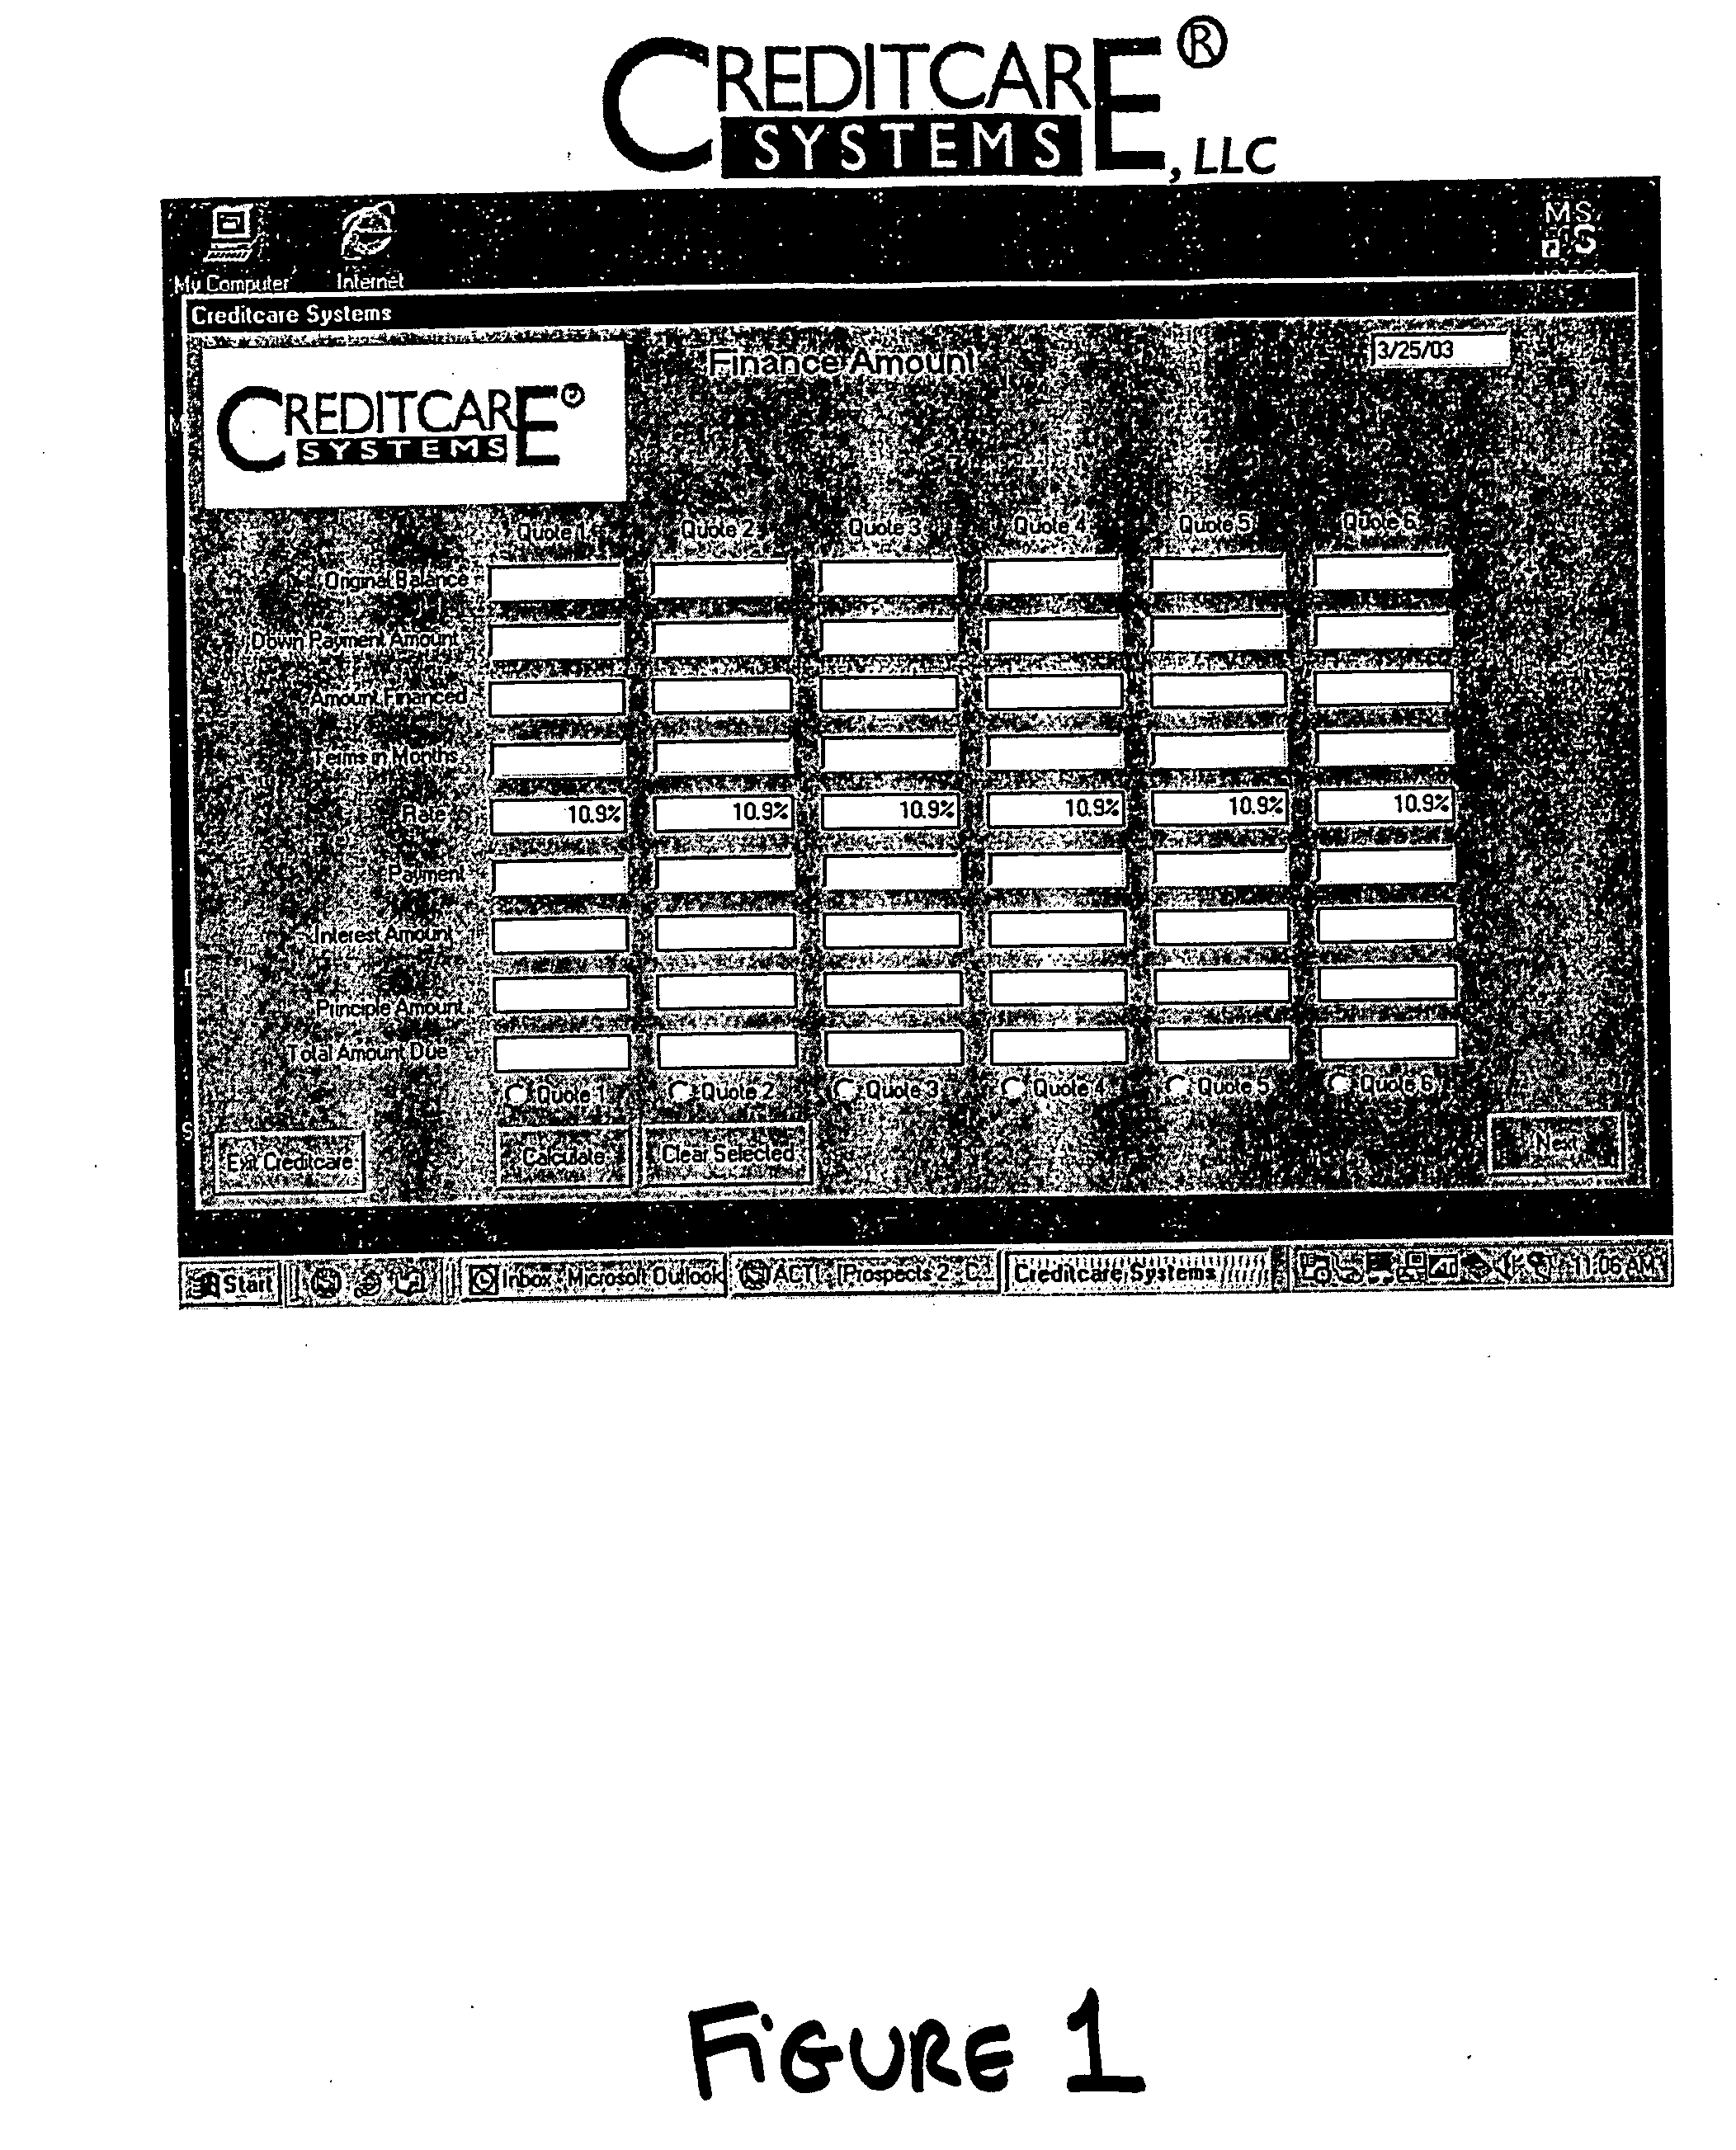 Method and system for obtaining payment for healthcare services using a healthcare note servicer